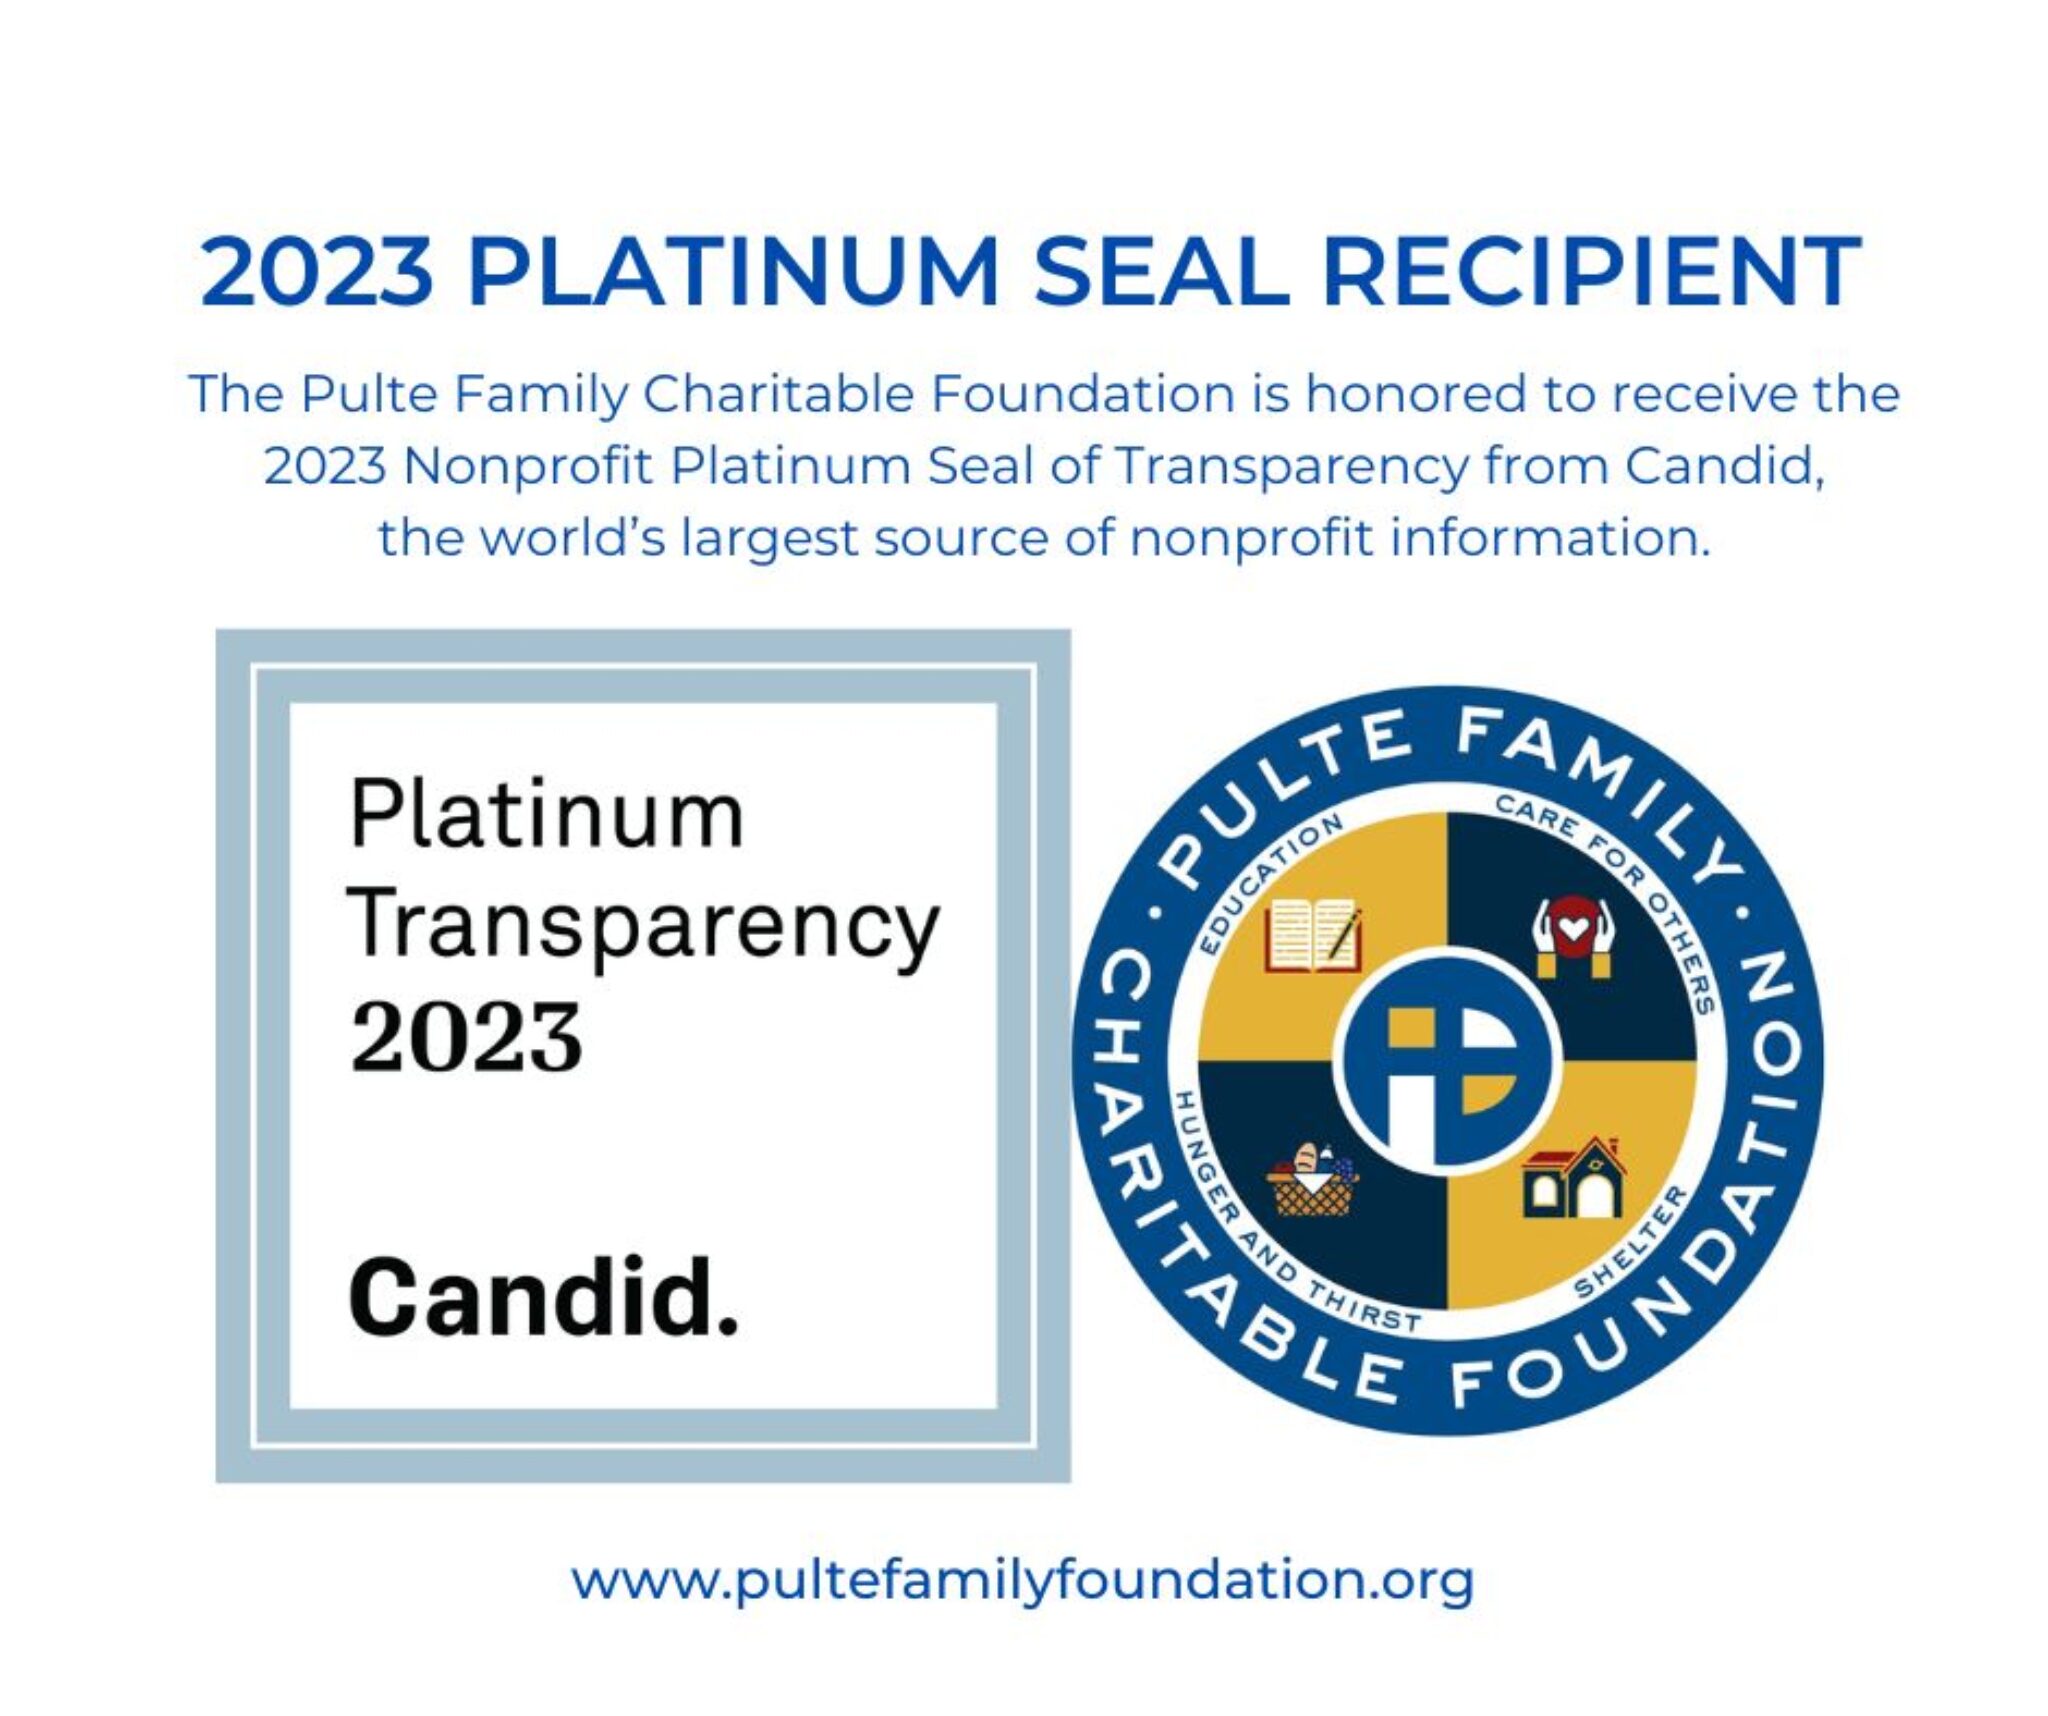 2023 Platinum Seal of Transparency Pulte Family